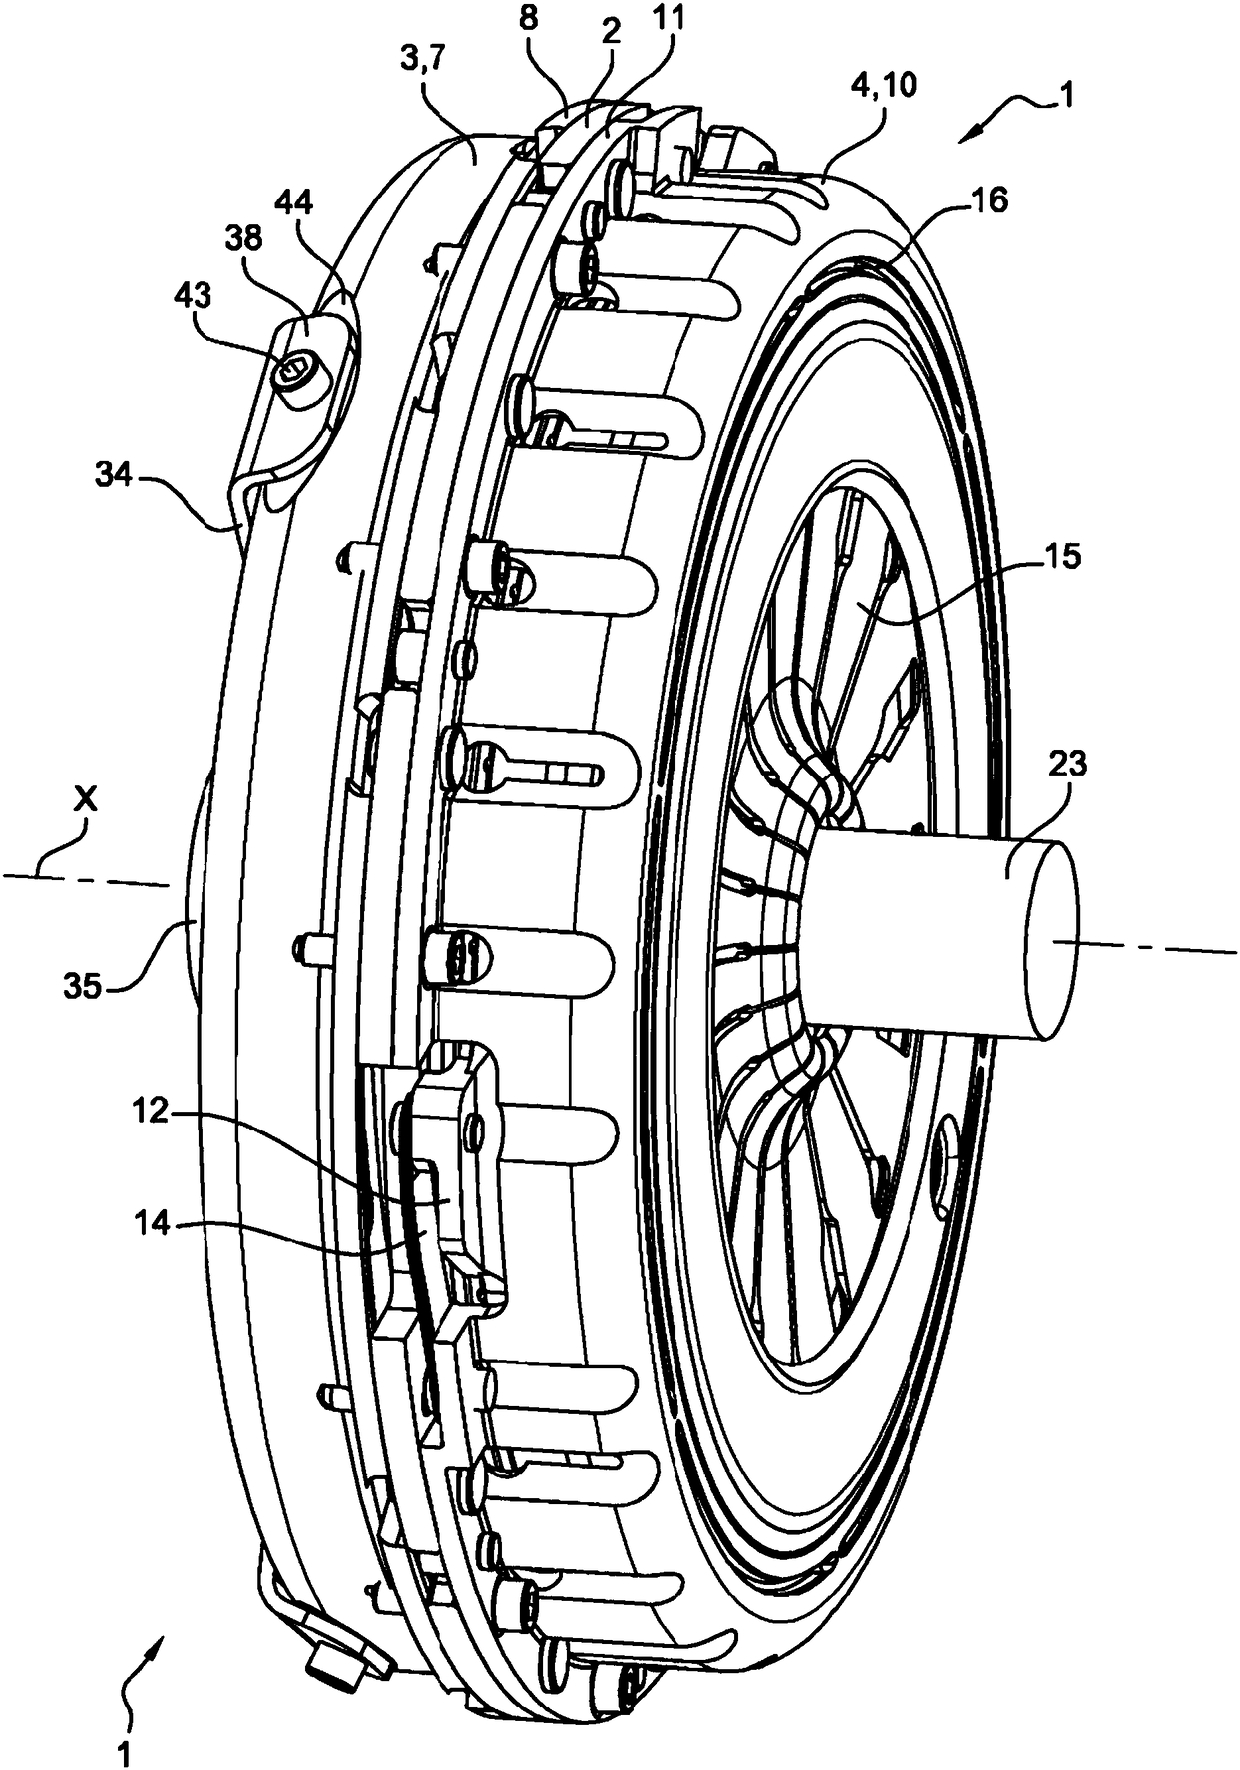 Clutch device for a motor vehicle